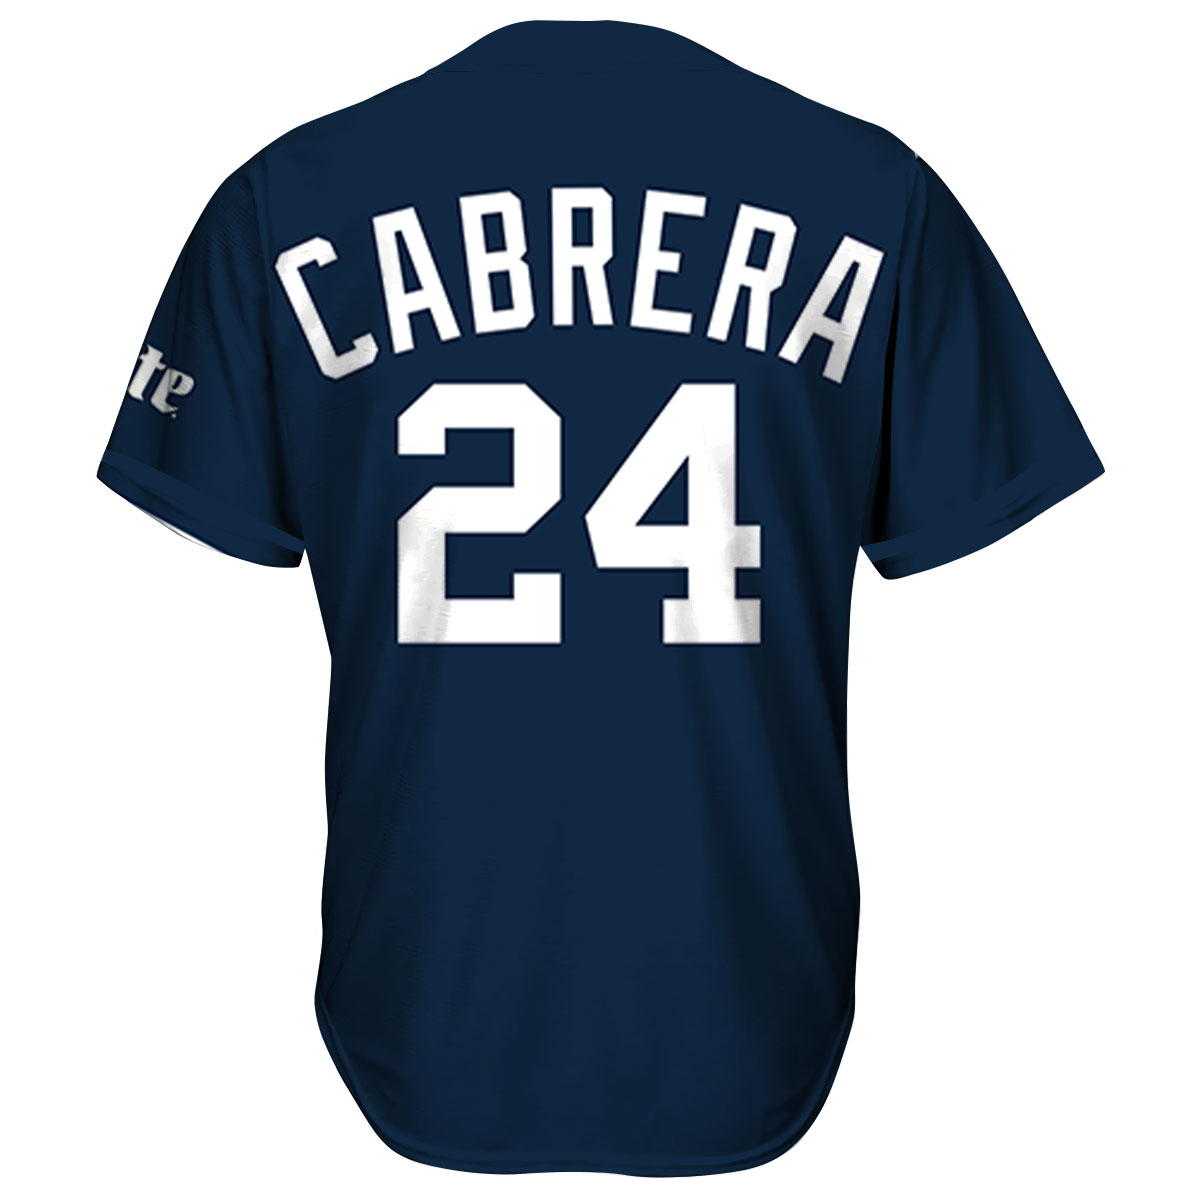 Tigers jersey giveaway